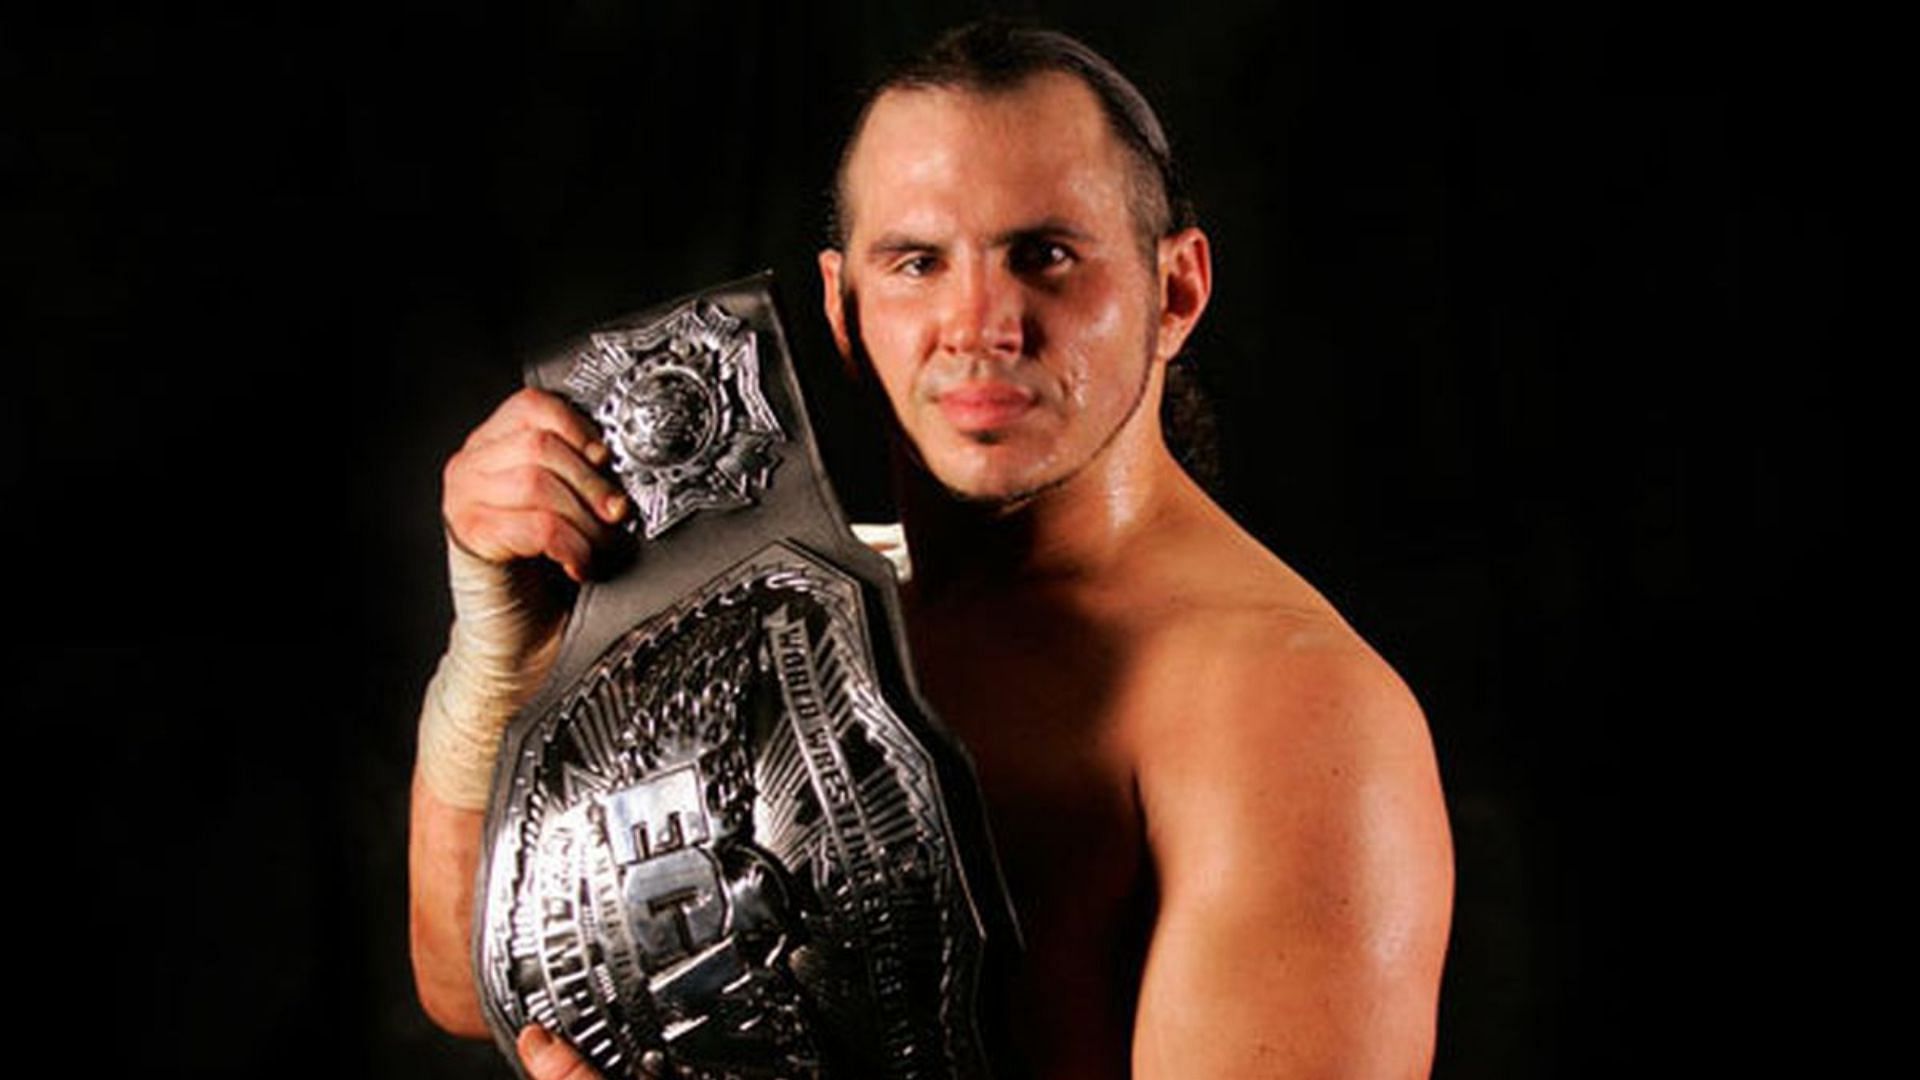 Could Matt Hardy have avoided his current predicament?